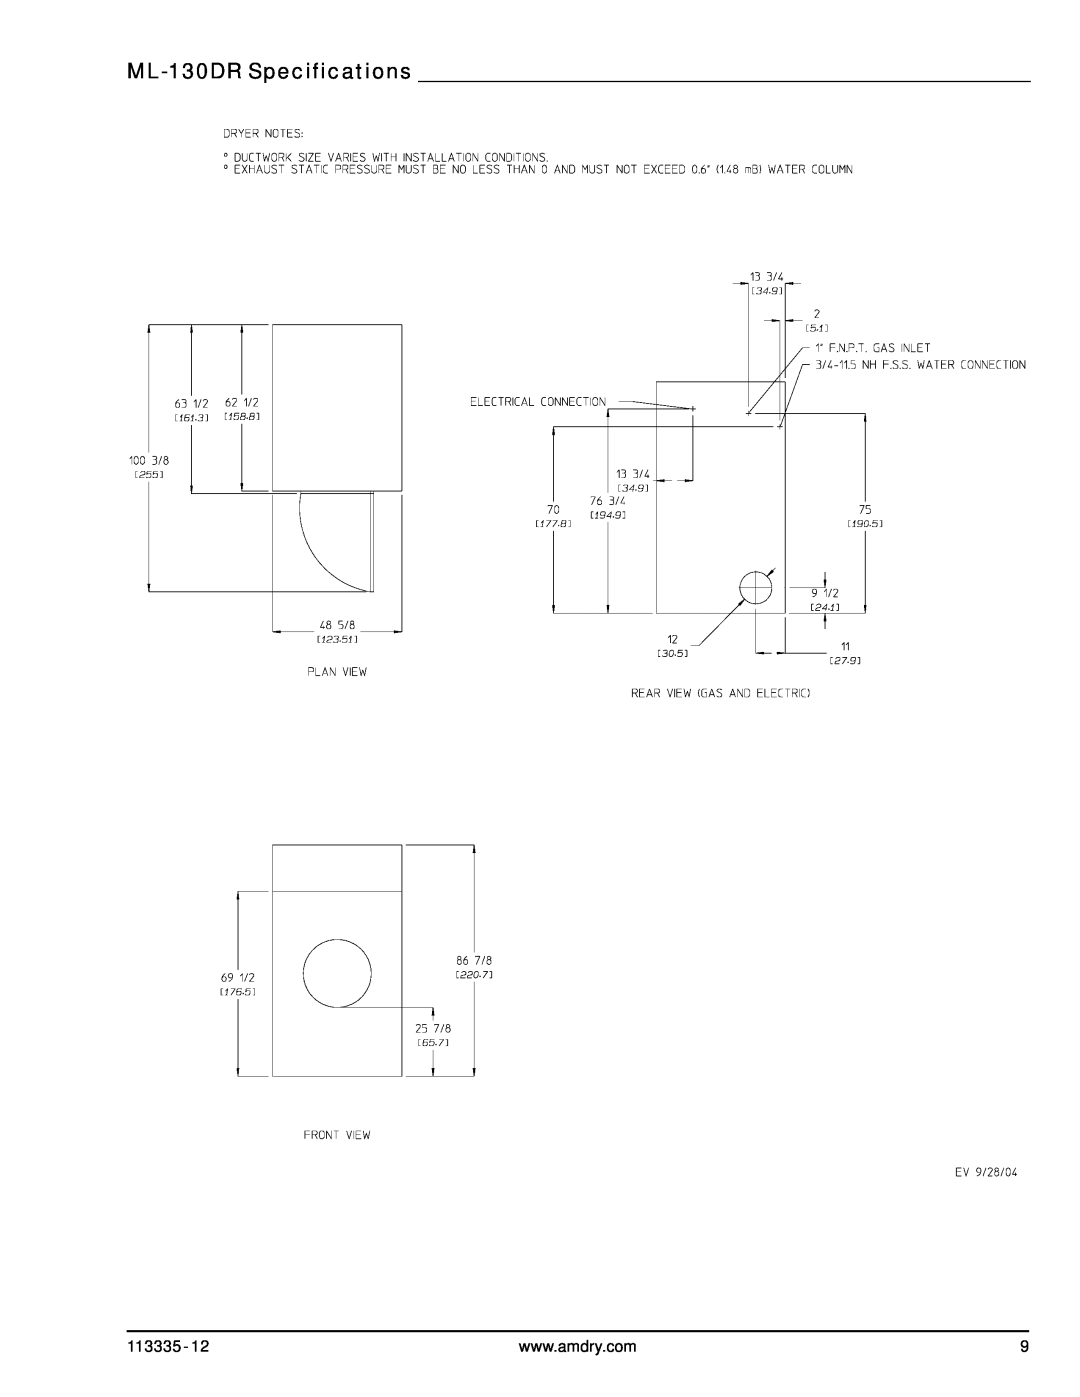 American Dryer Corp ML-130 III installation manual ML-130DR Specifications 